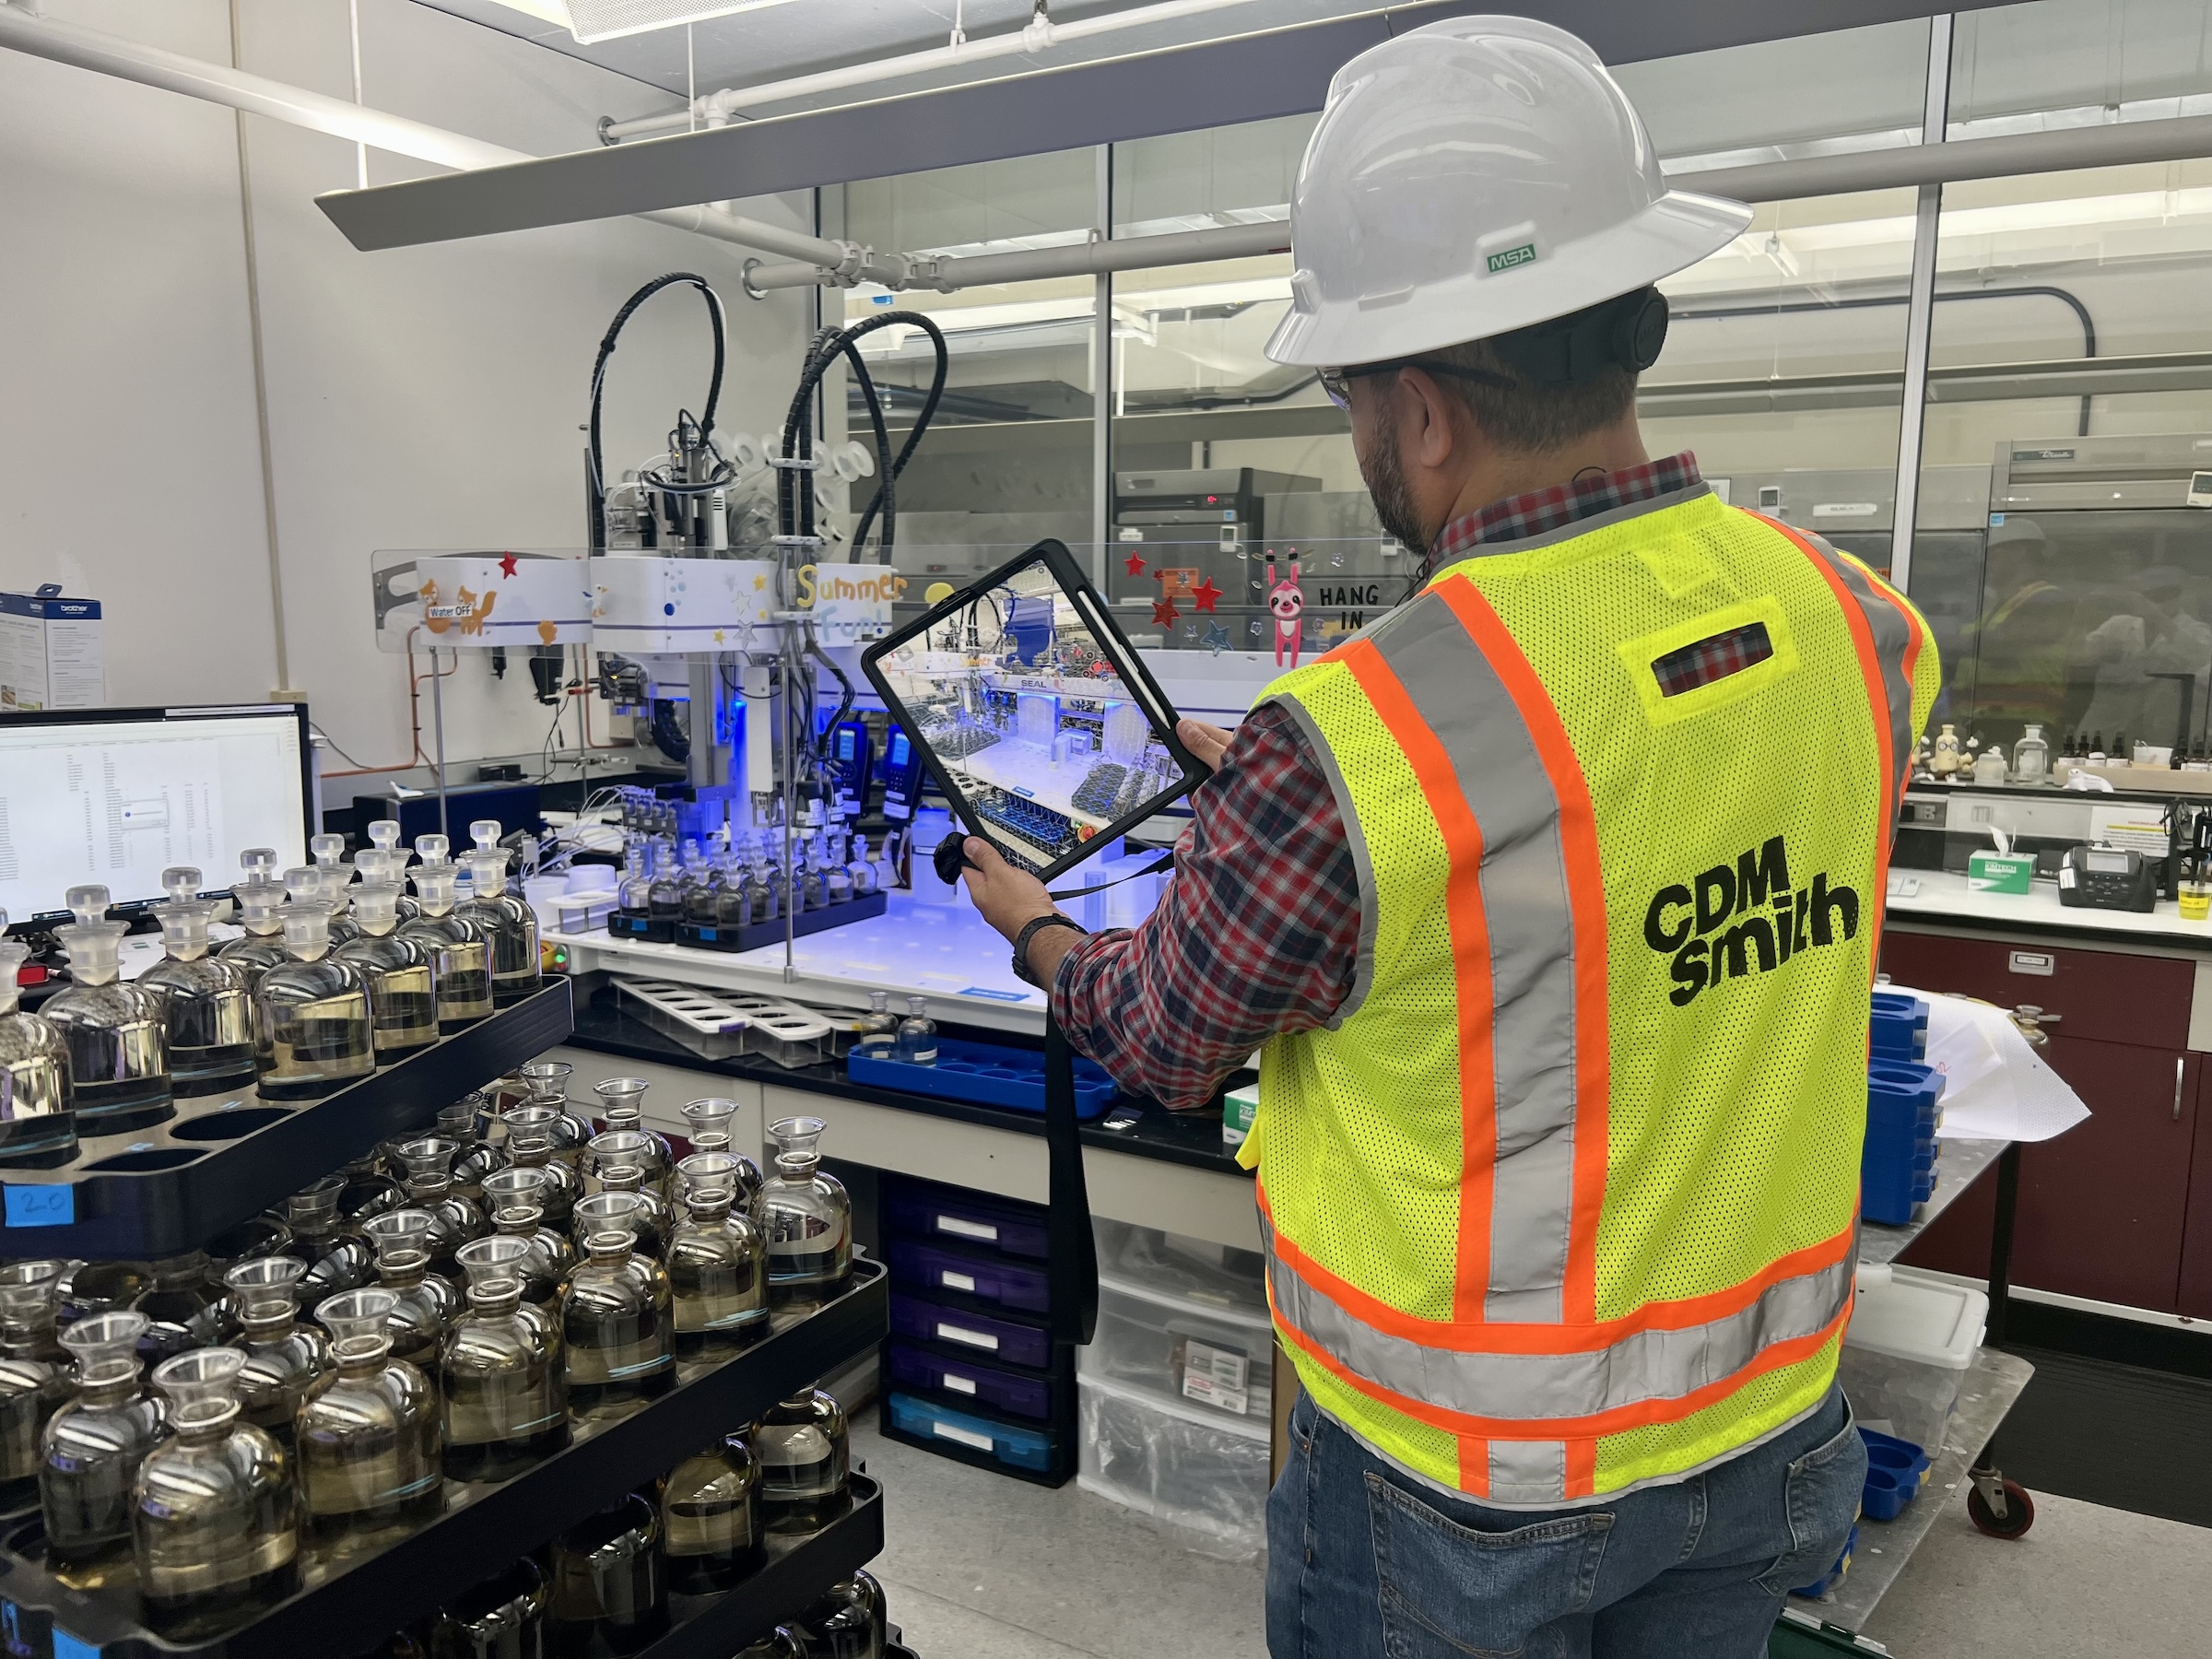 The Hampton Roads Sanitation District (HRSD) in Virginia Beach, Va., used LIDAR and BIM technology to develop precise building and equipment data for a planned expansion of its Central Environmental Laboratory. Photo courtesy CDM Smith